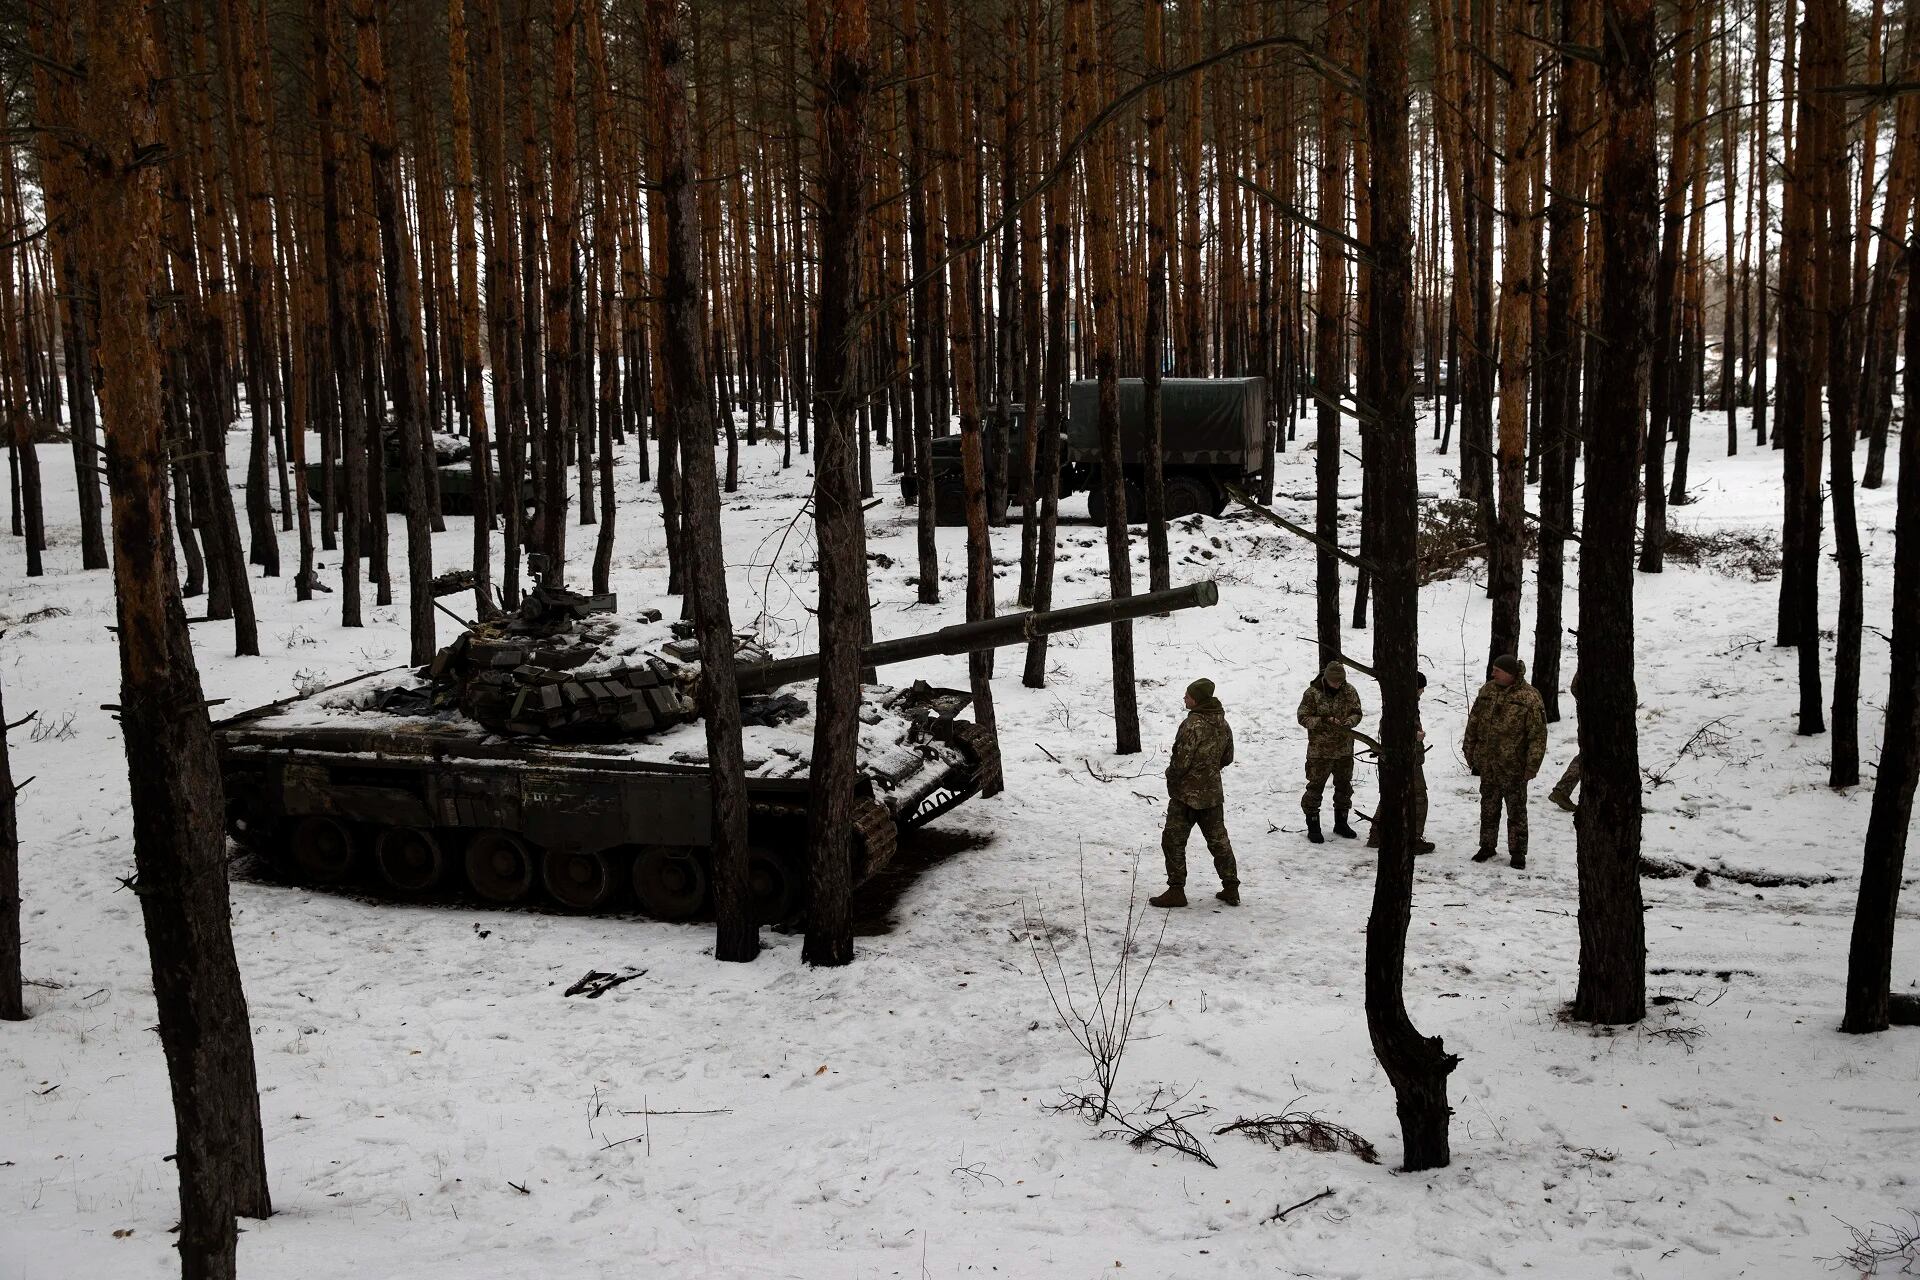 Members of a Ukrainian unit in a forest in eastern Ukraine, Feb. 21, 2023. In a lengthy address on Tuesday, President Vladimir Putin of Russia again falsely claimed that Western nations had “started the war” in Ukraine and showed no sign of ending an invasion that has failed to achieve many of Putin’s objectives after nearly a year of brutal fighting. (Tyler Hicks/The New York Times)